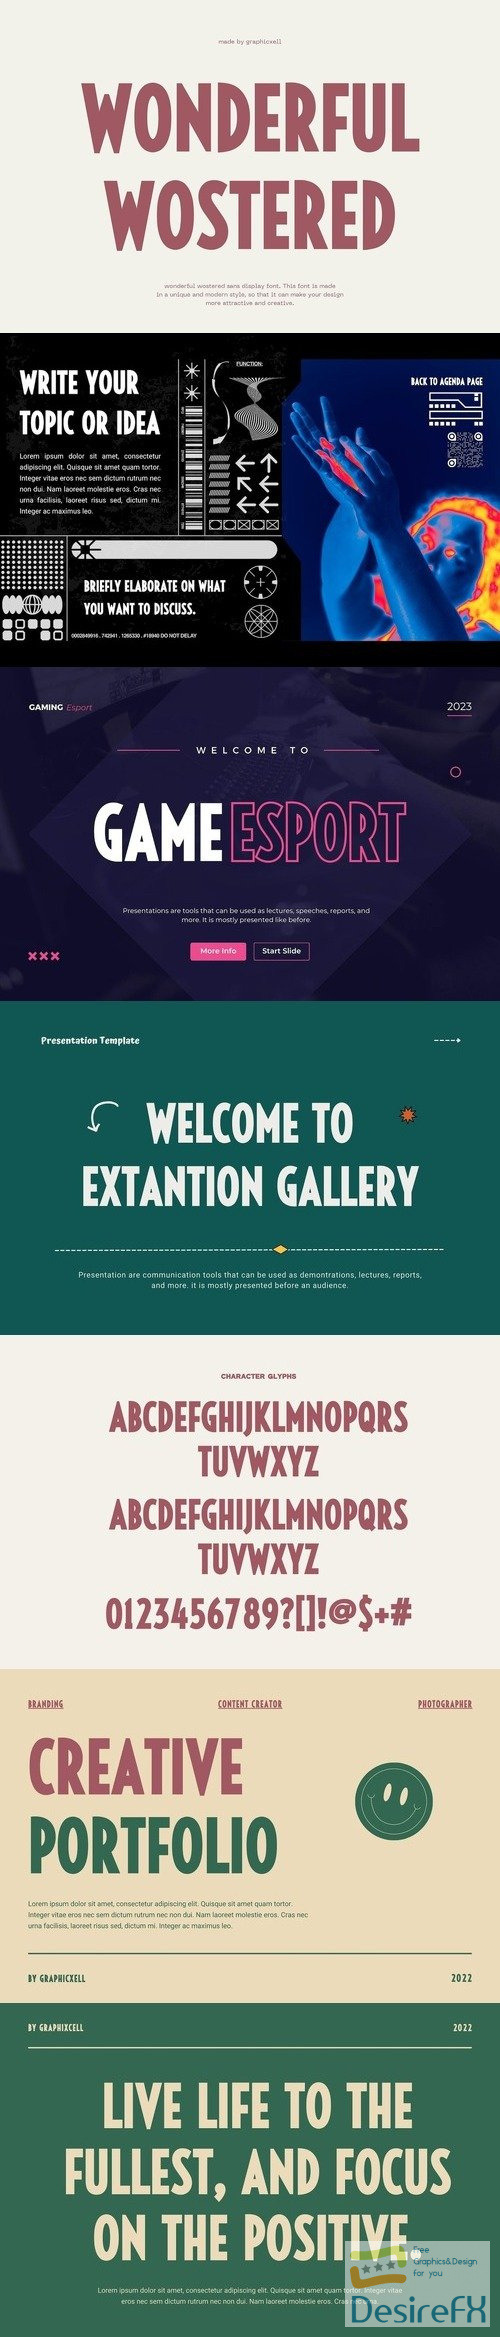 Wonderful Wostered Display Sans Font Typeface